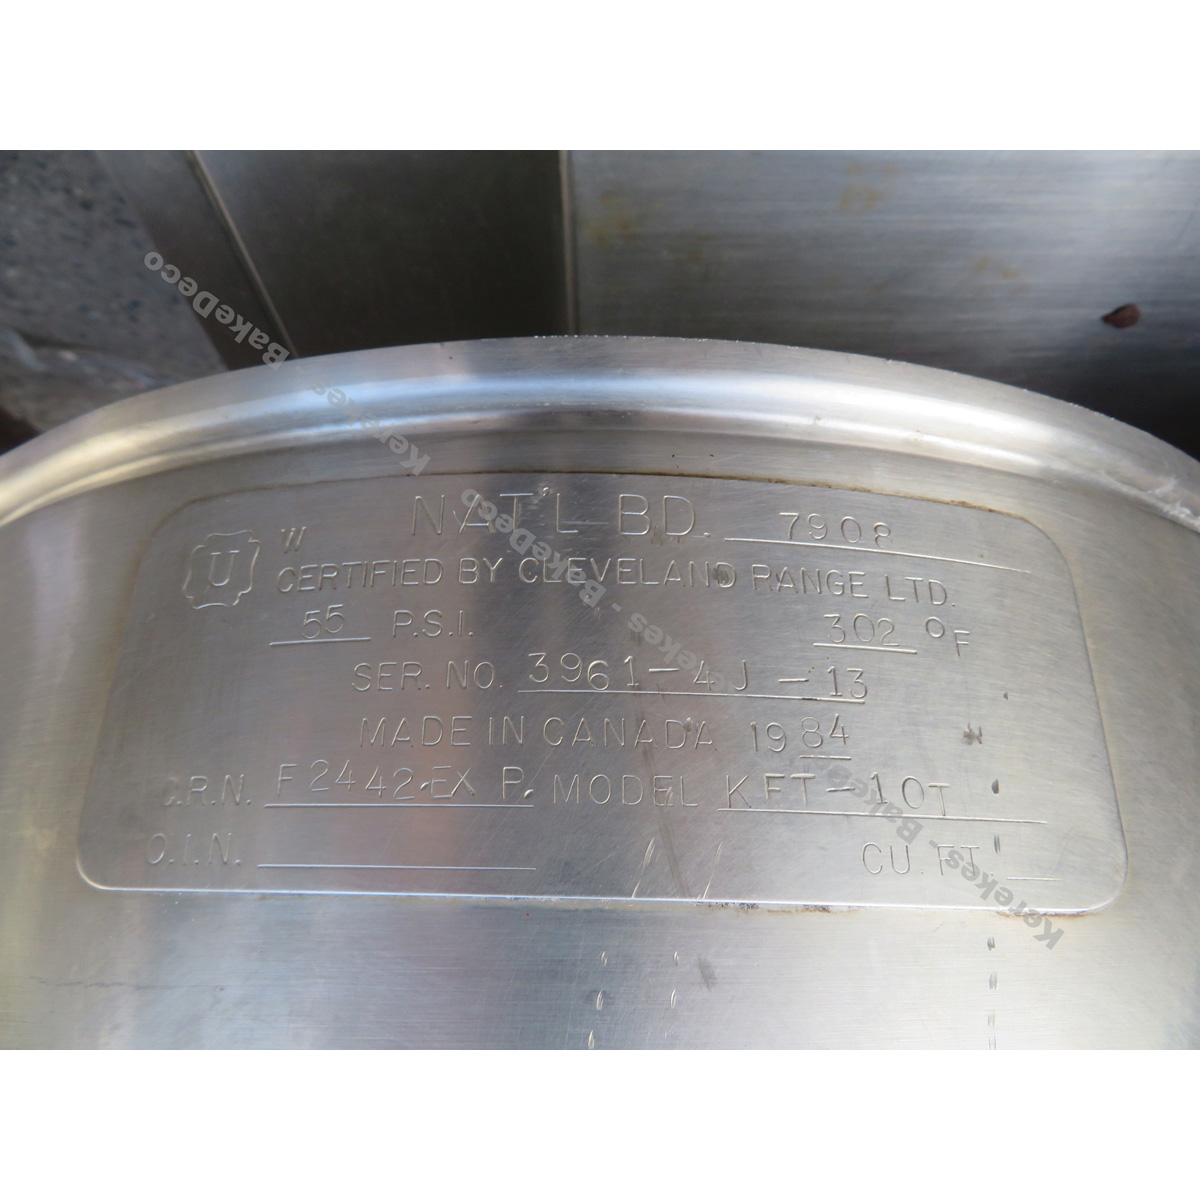 Cleveland Kettle 10 gal, Electric, KET-10T, Used Great Condition image 5